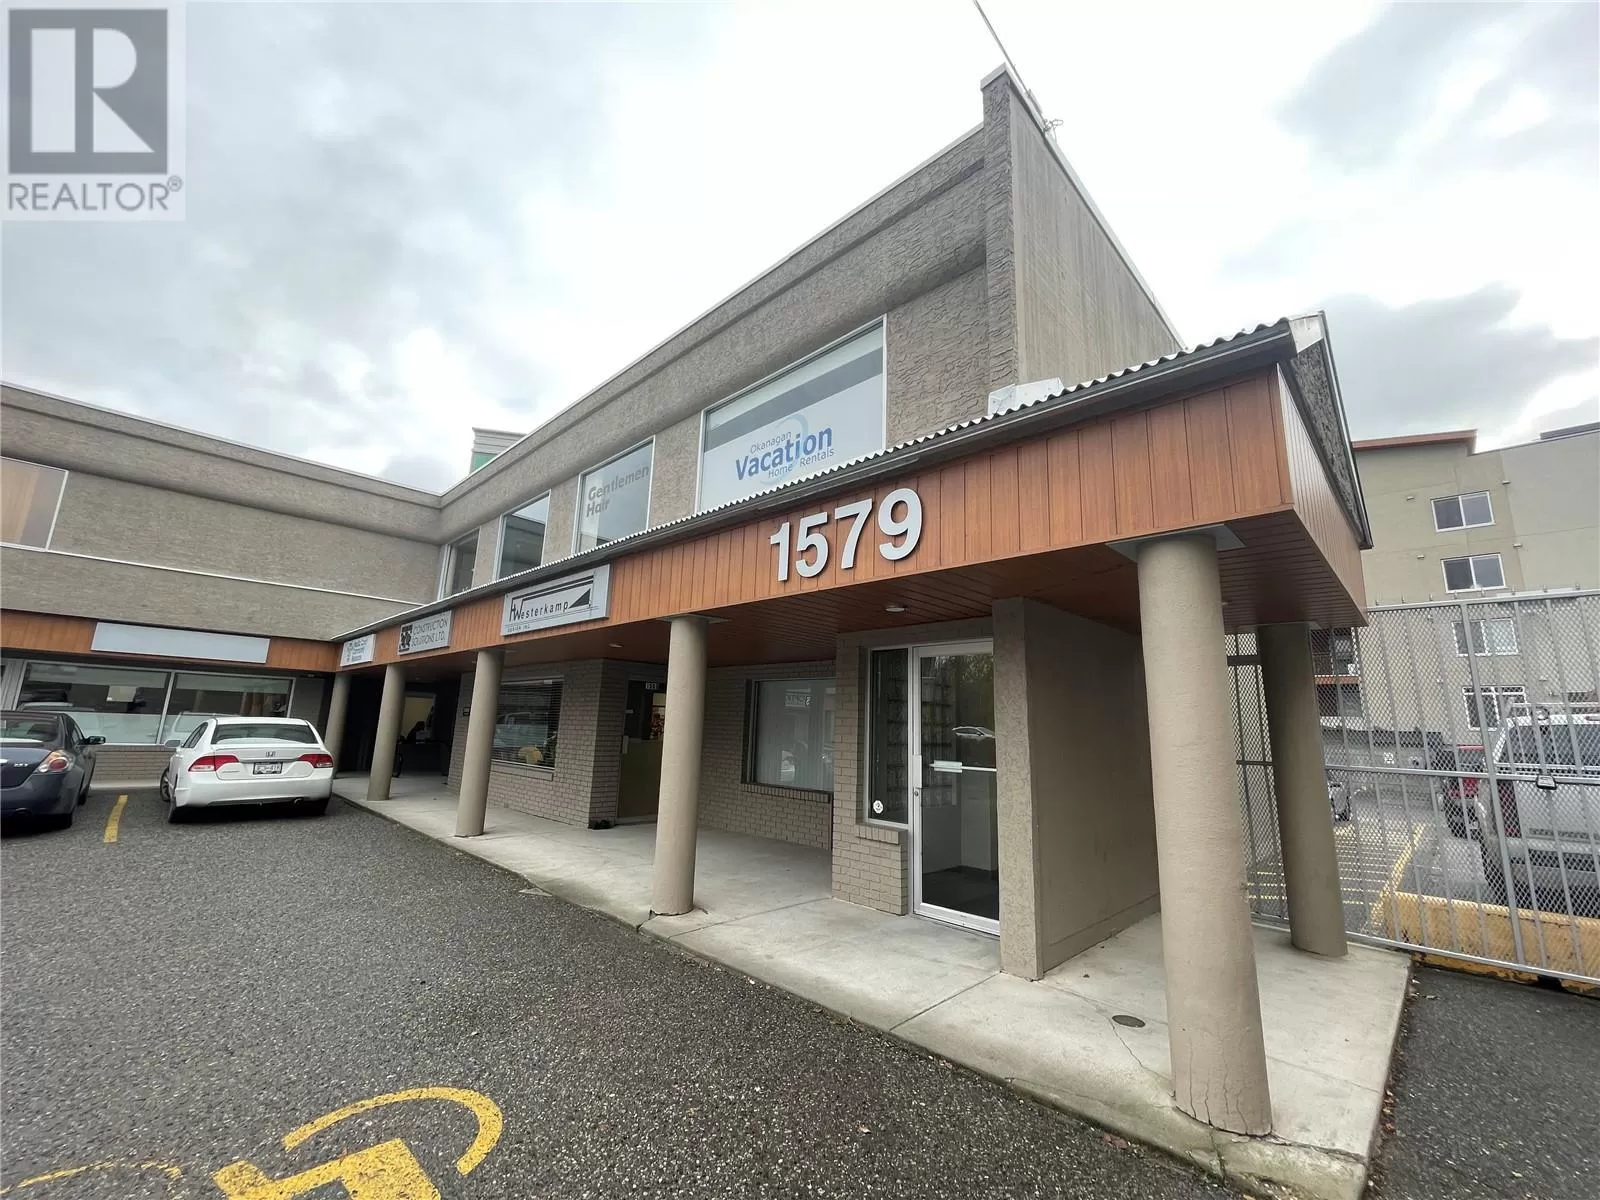 Offices for rent: 1579 Sutherland Avenue Unit# 201, Kelowna, British Columbia V1Y 5Y7